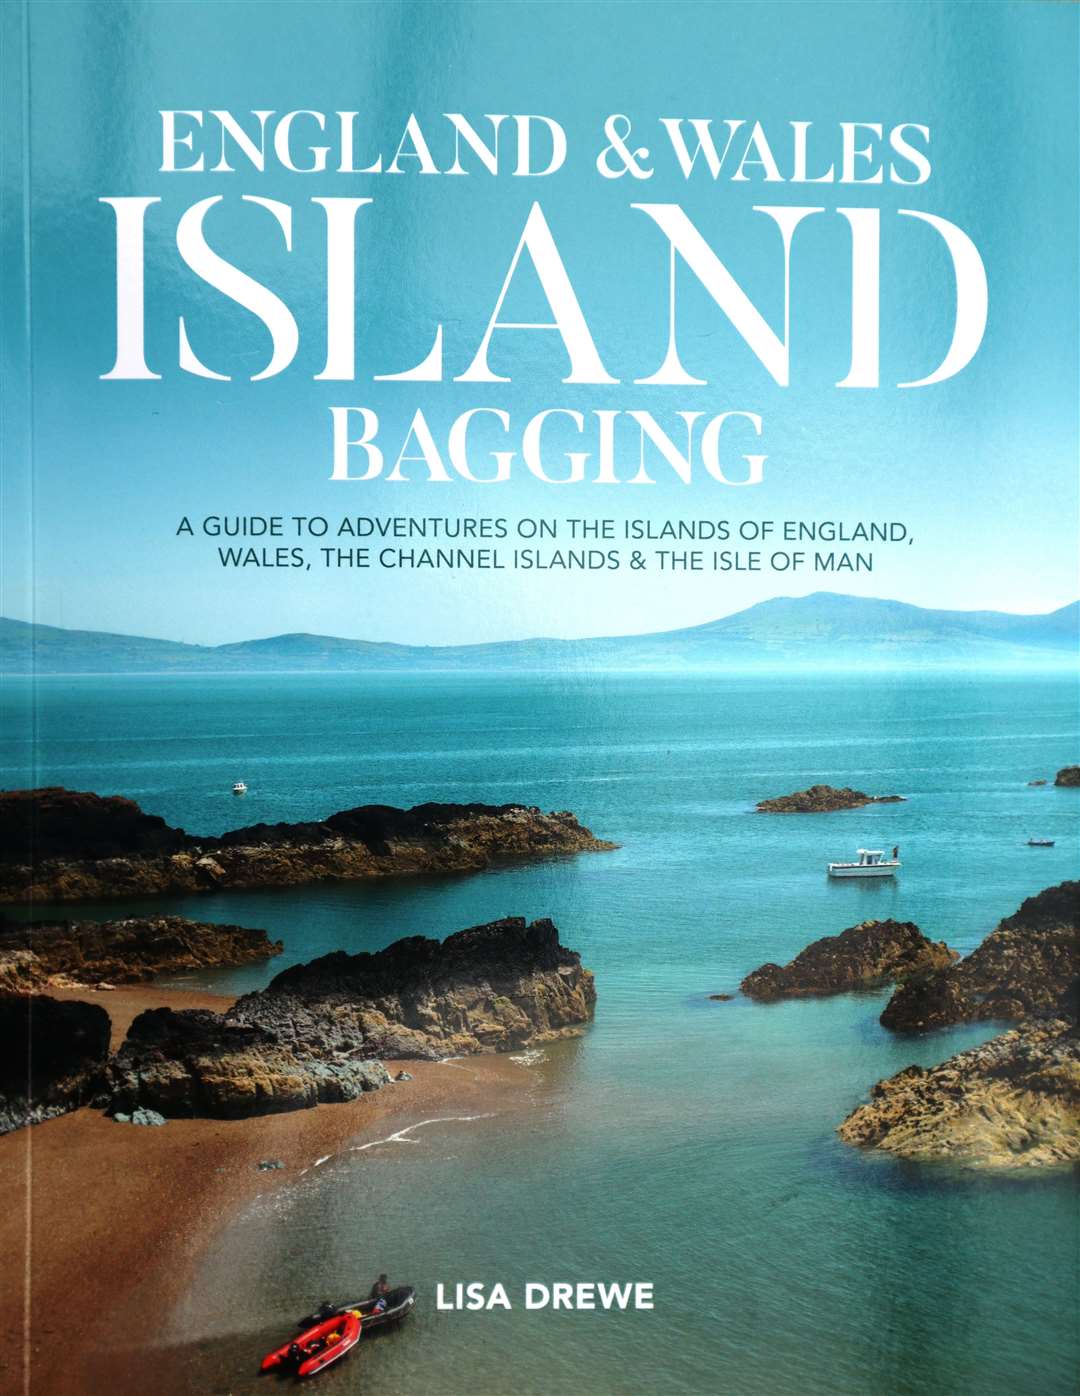 Lisa Drewe has written Island Bagging which includes a chapter on the Isle of Sheppey